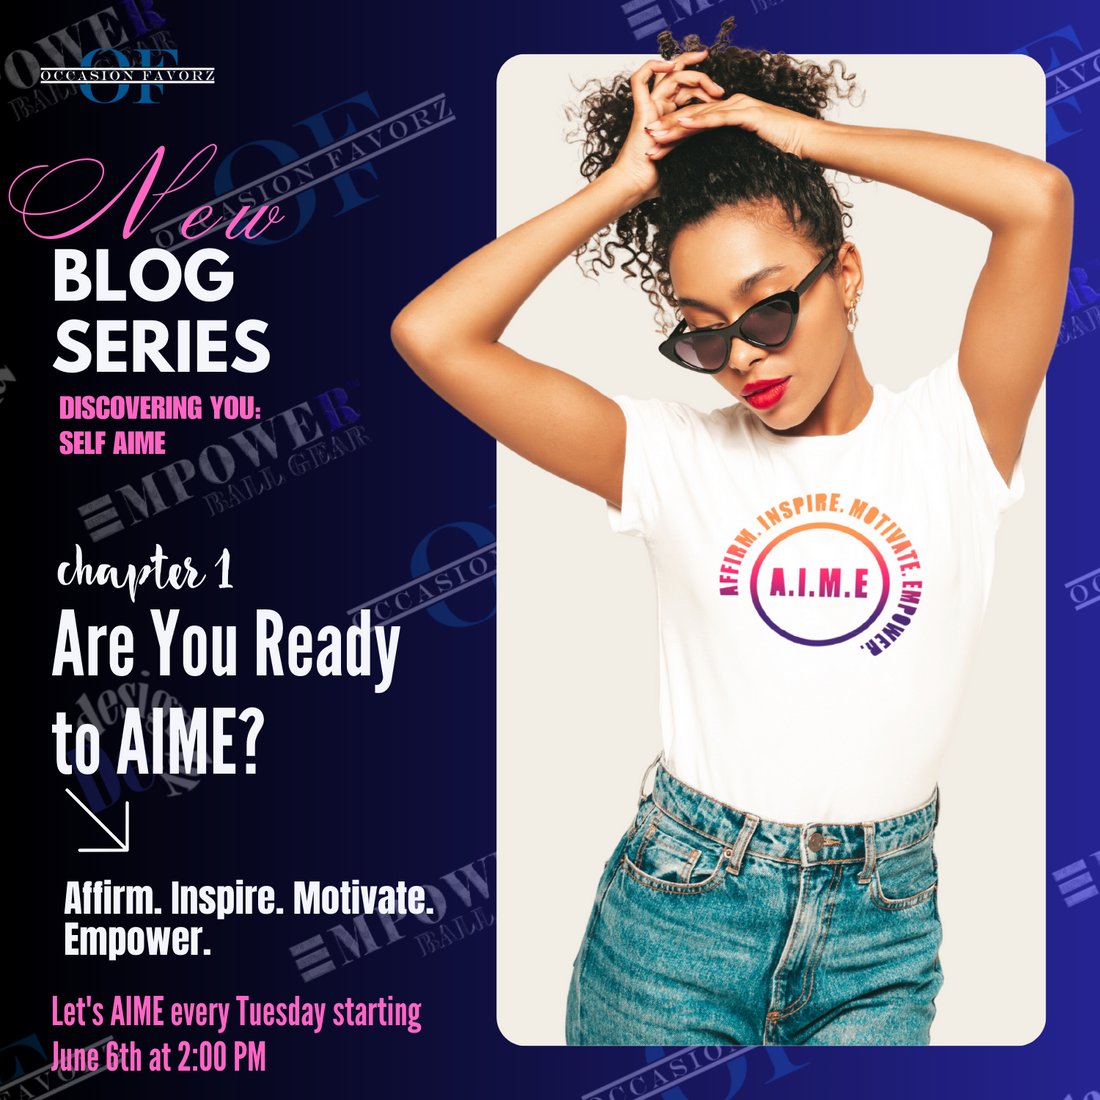 Affirm, Inspire, Motivate and Empower Yourself. New Blog Series!